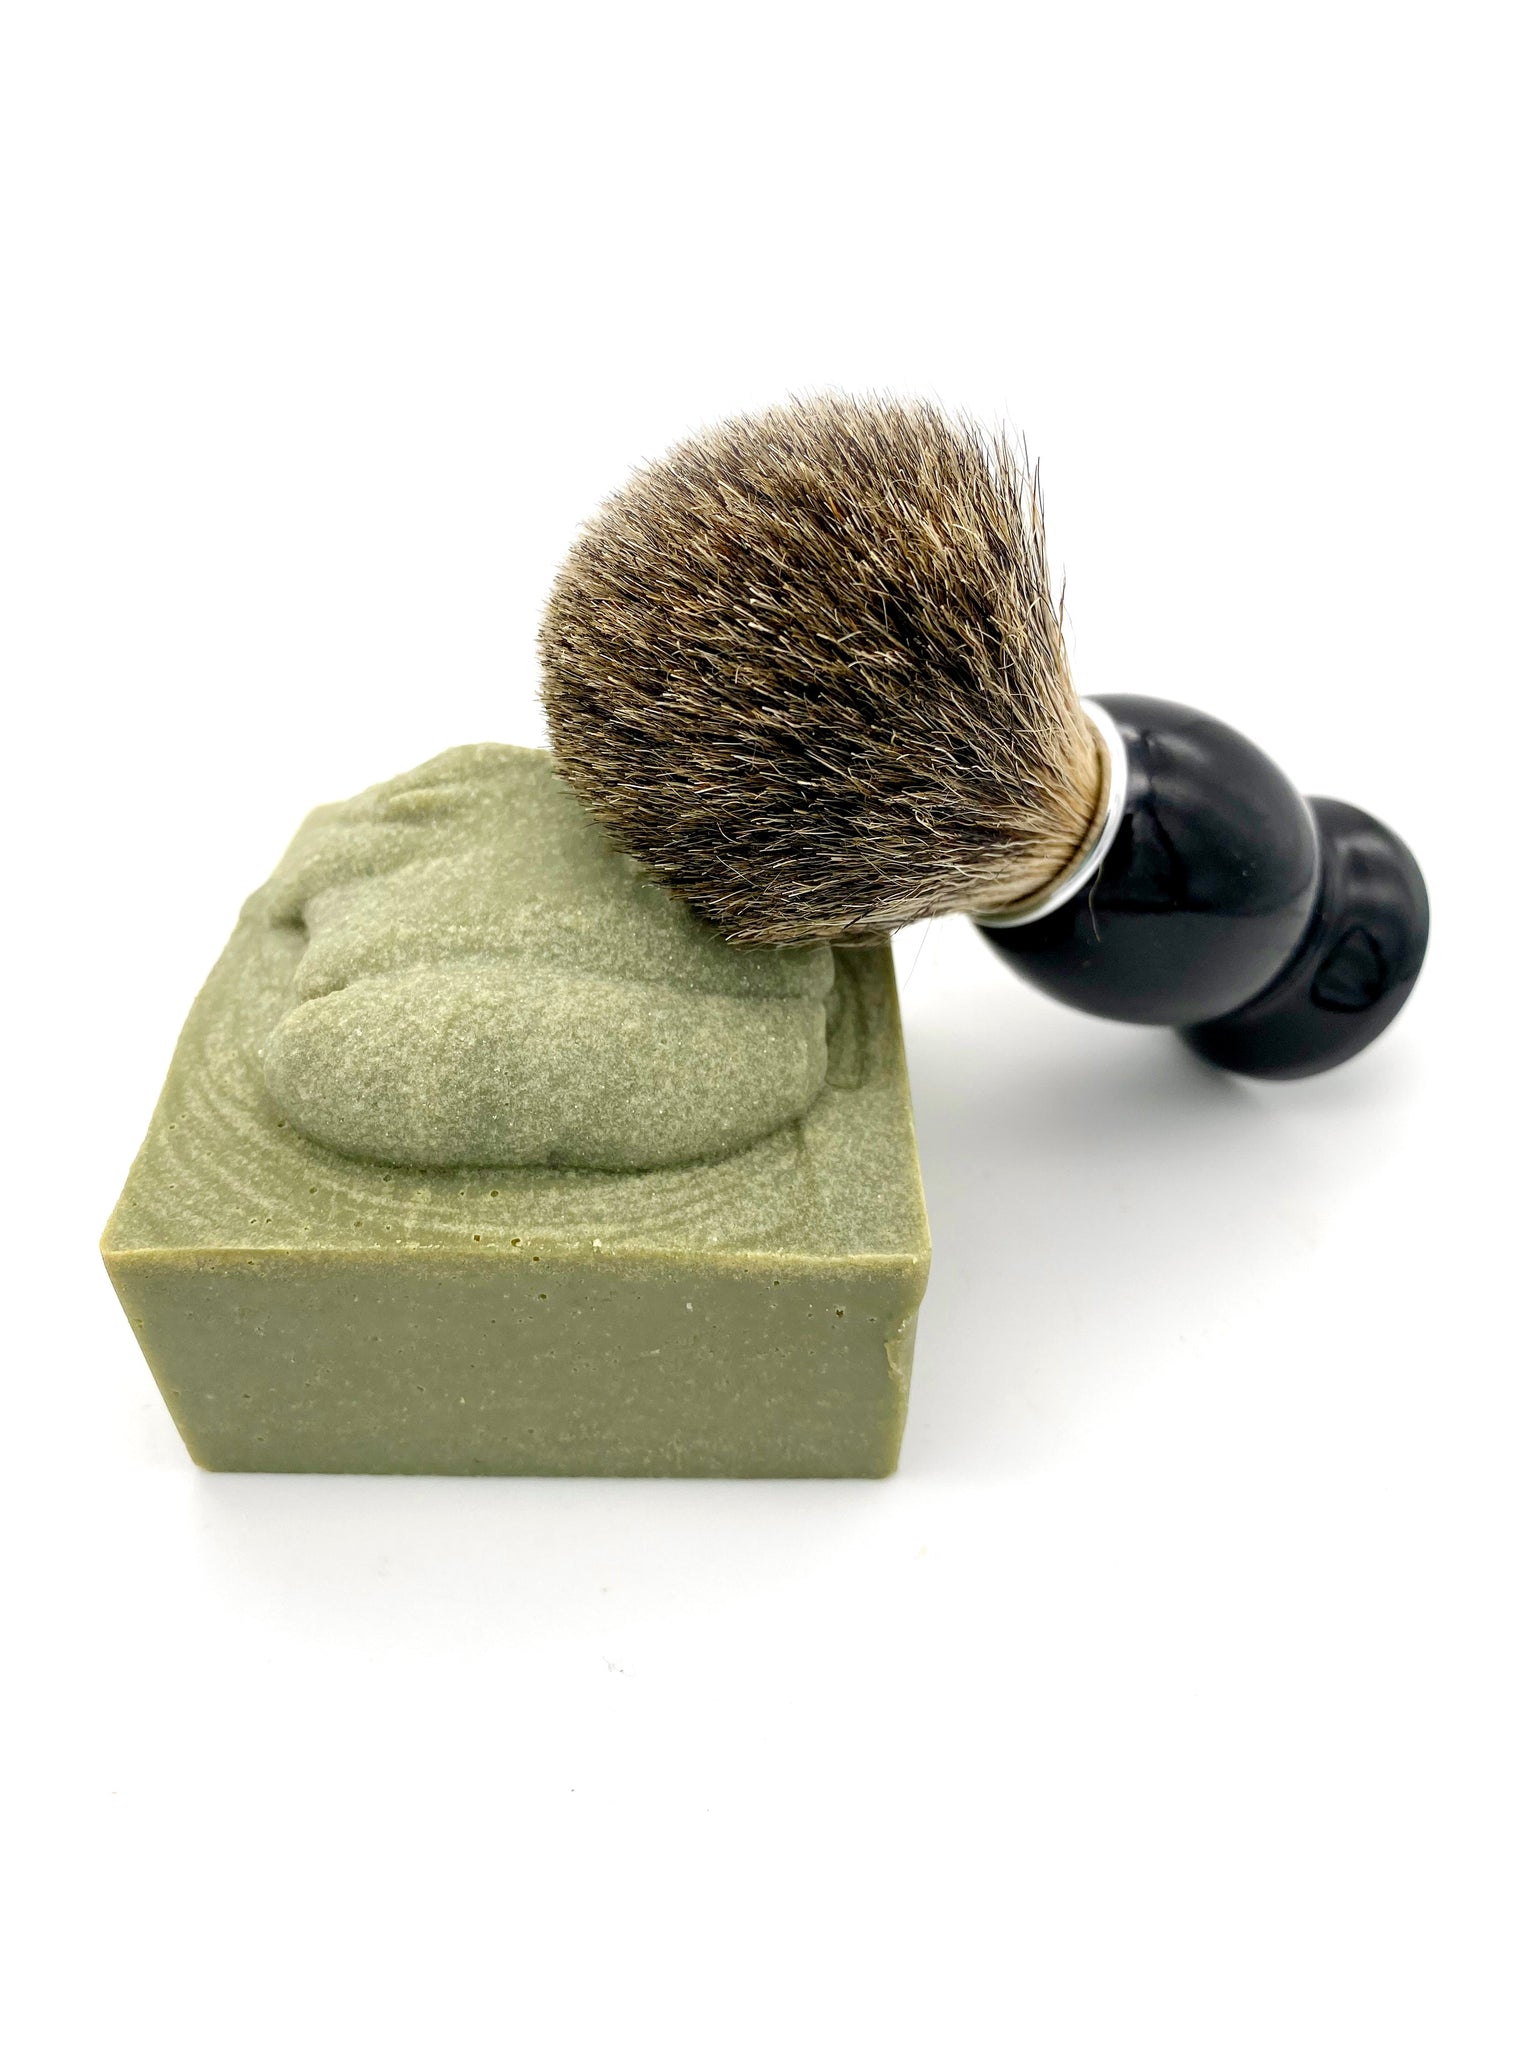 French Clay. Shave Bar, - Enevoldsen Limited